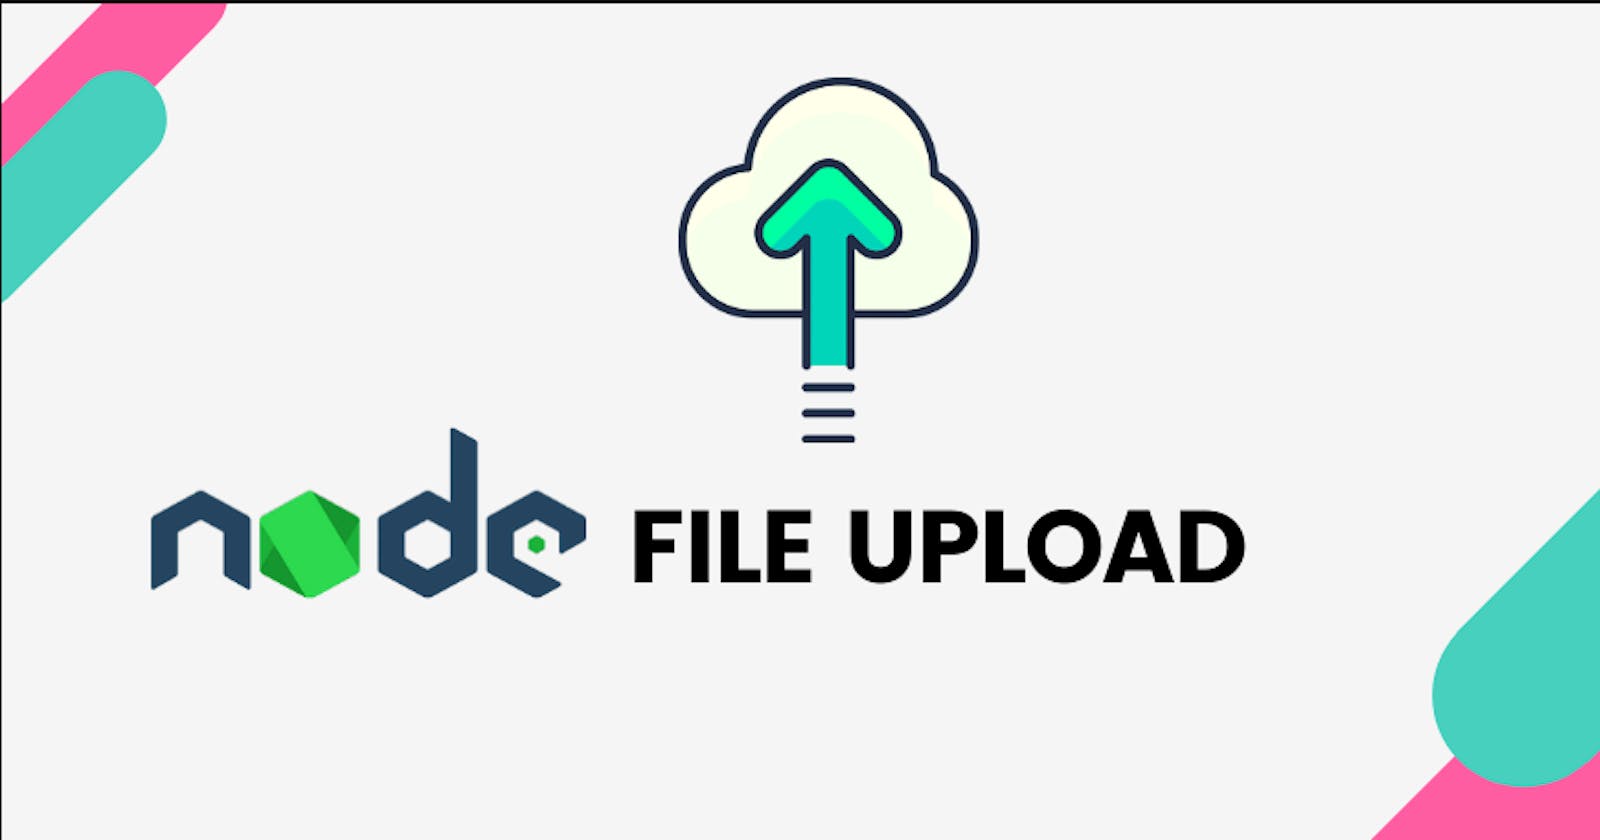 Uploading and processing images in node js.